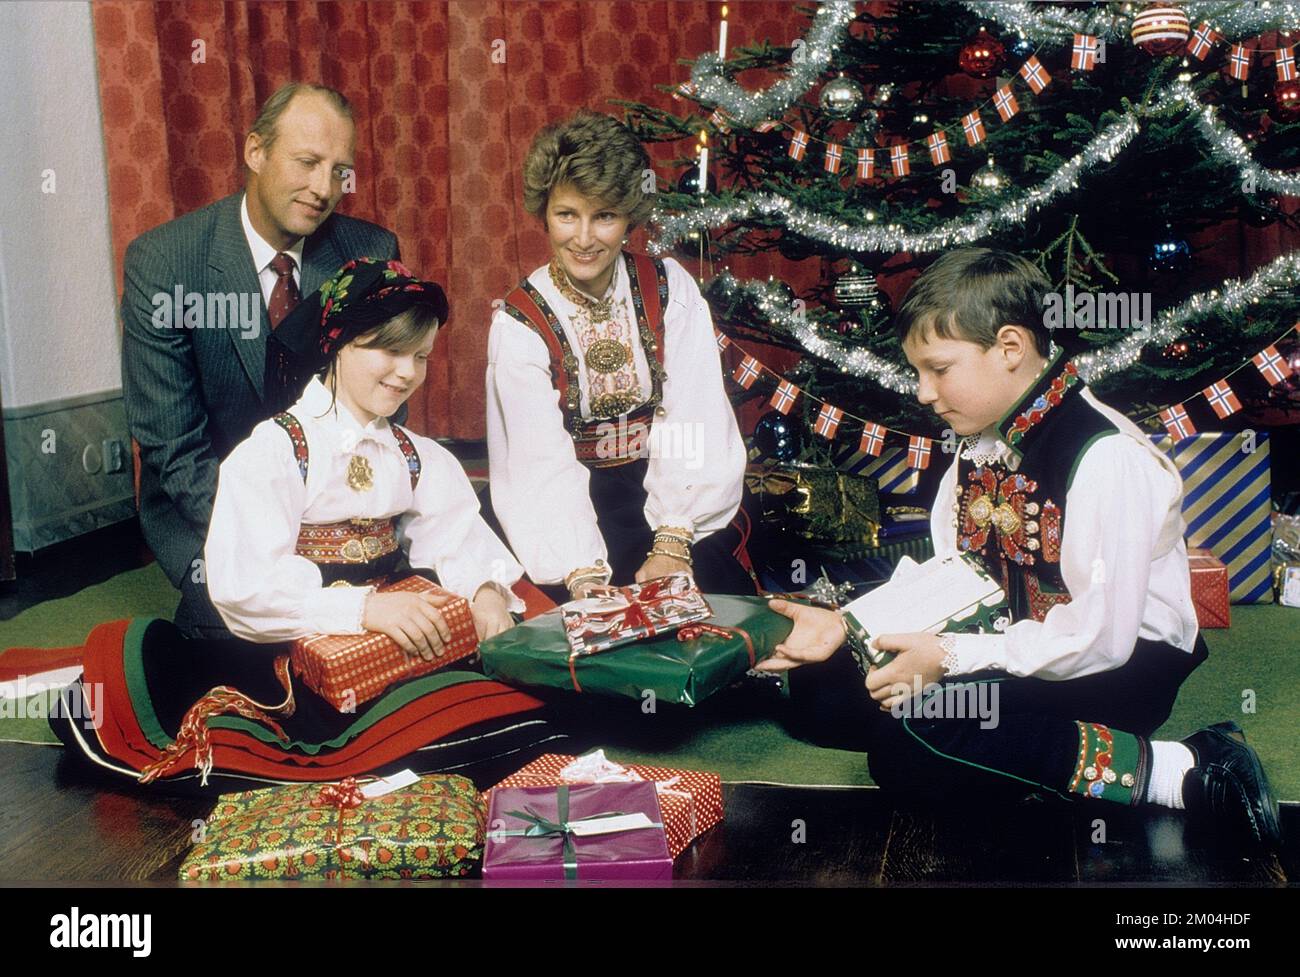 Norwegian royal family at christmas in the 1980s. Prince Harald of Norway, Sonja of Norway with her children Märtha Louise and Haakon Magnus. Stock Photo